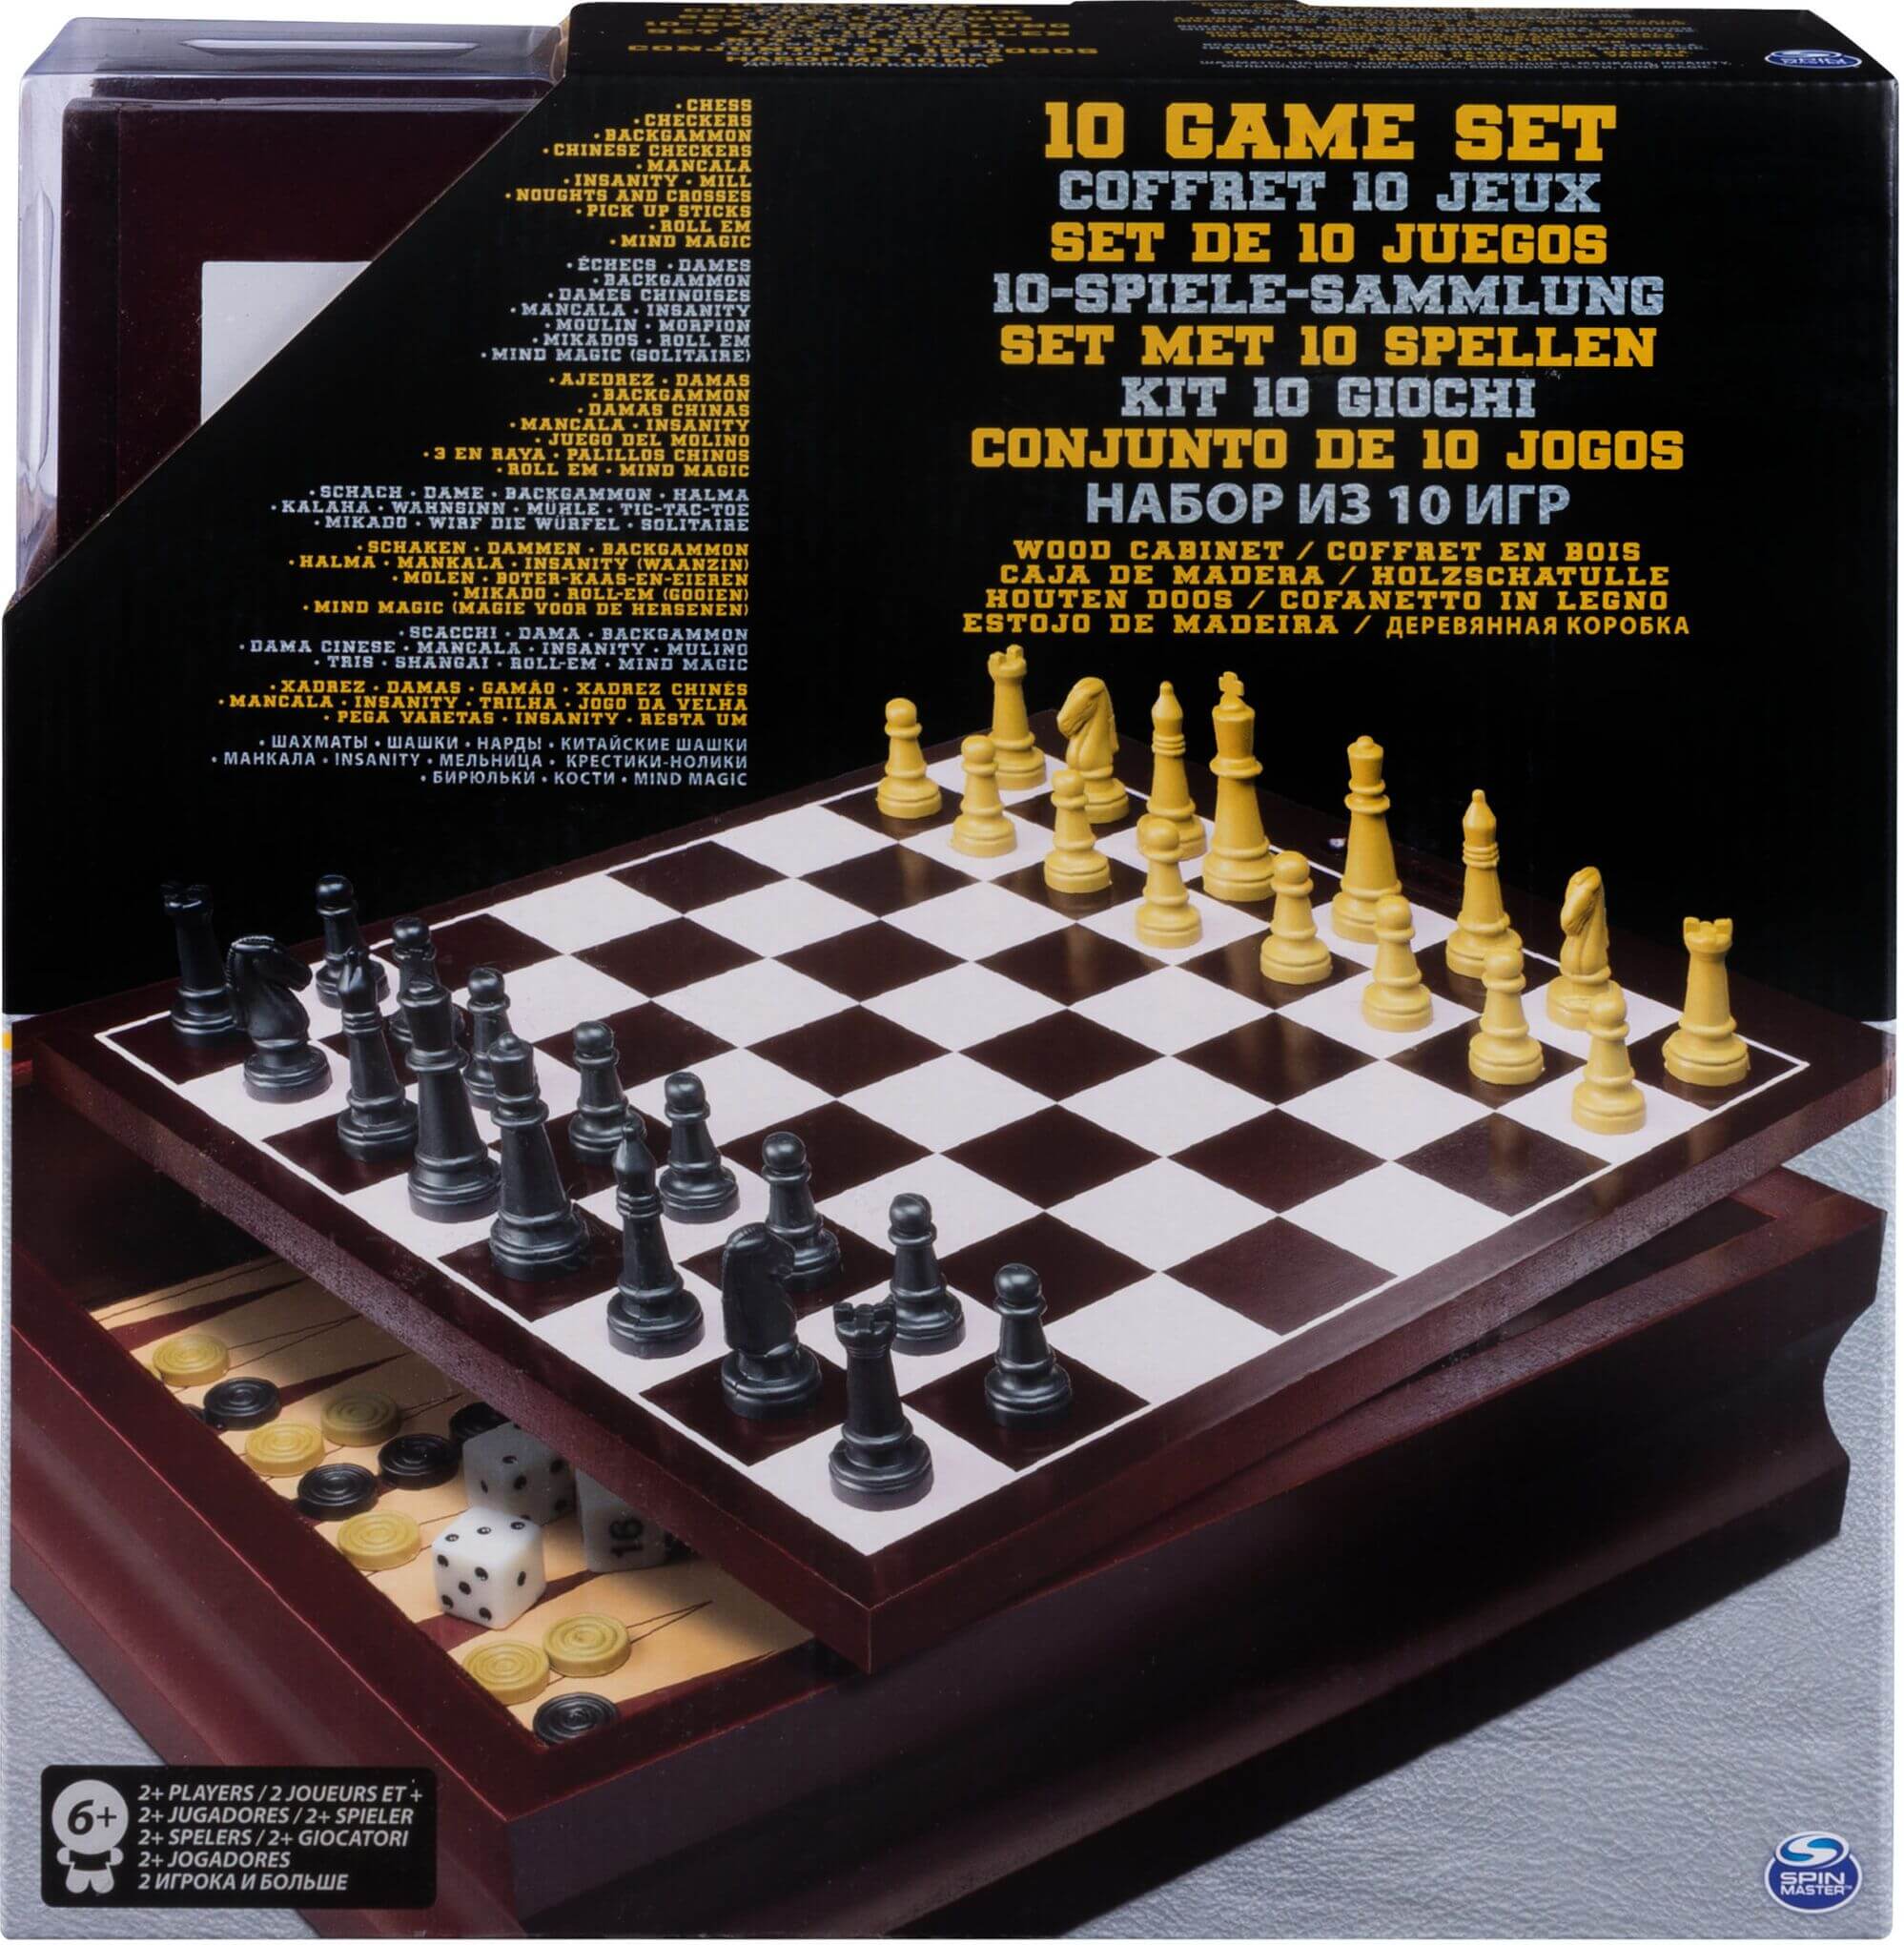 Family game set - spinmaster games - wooden chess